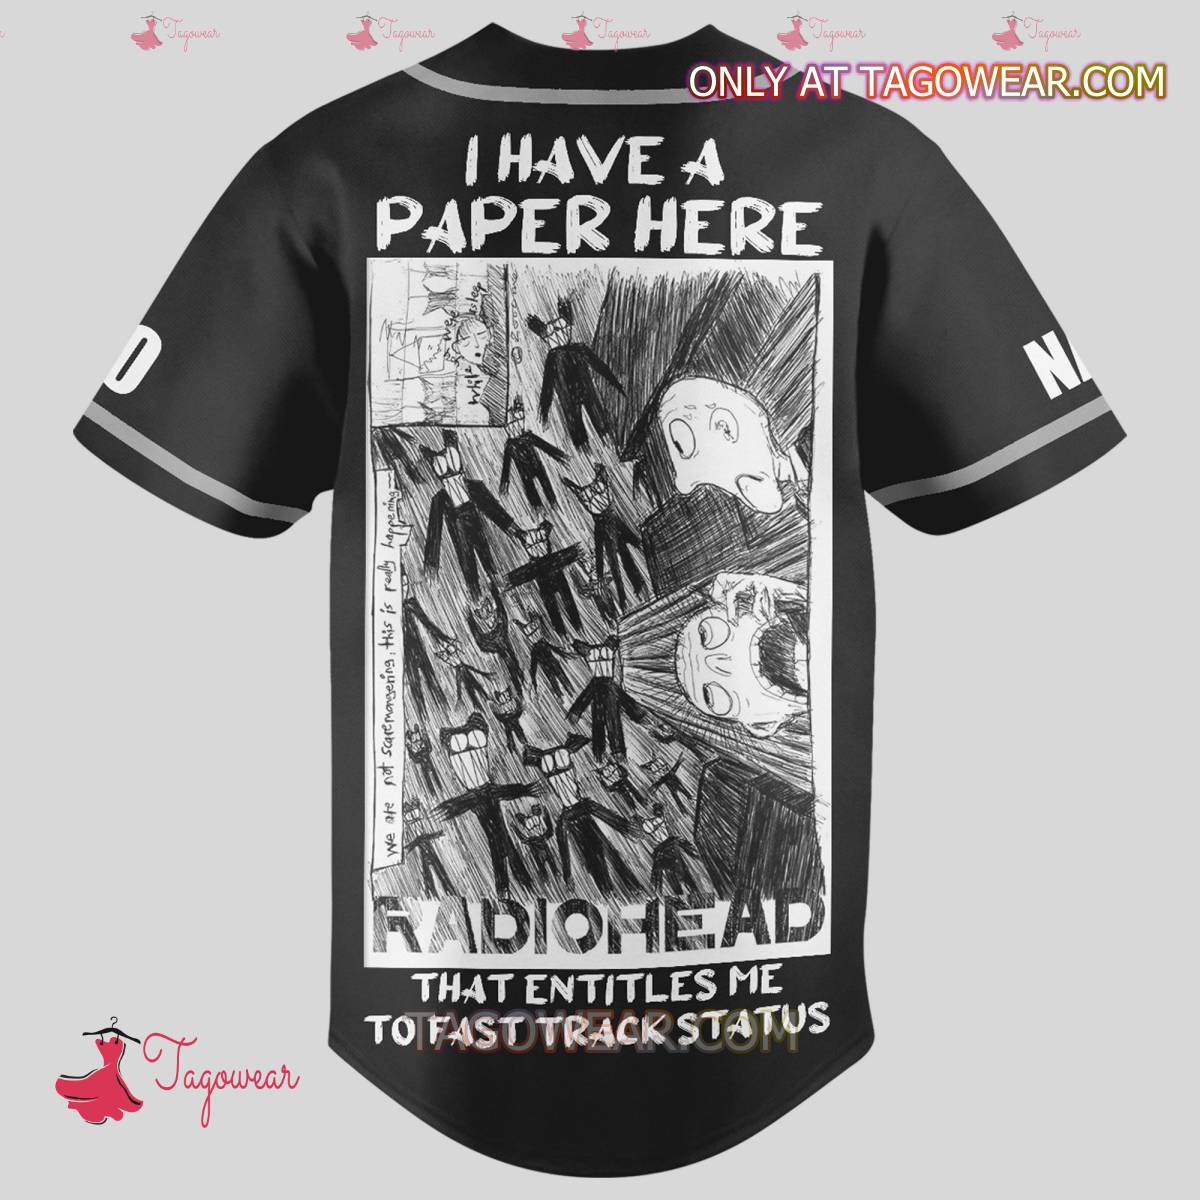 Radiohead I Have A Paper Here That Entitles Me To Fast Track Status Personalized Baseball Jersey a